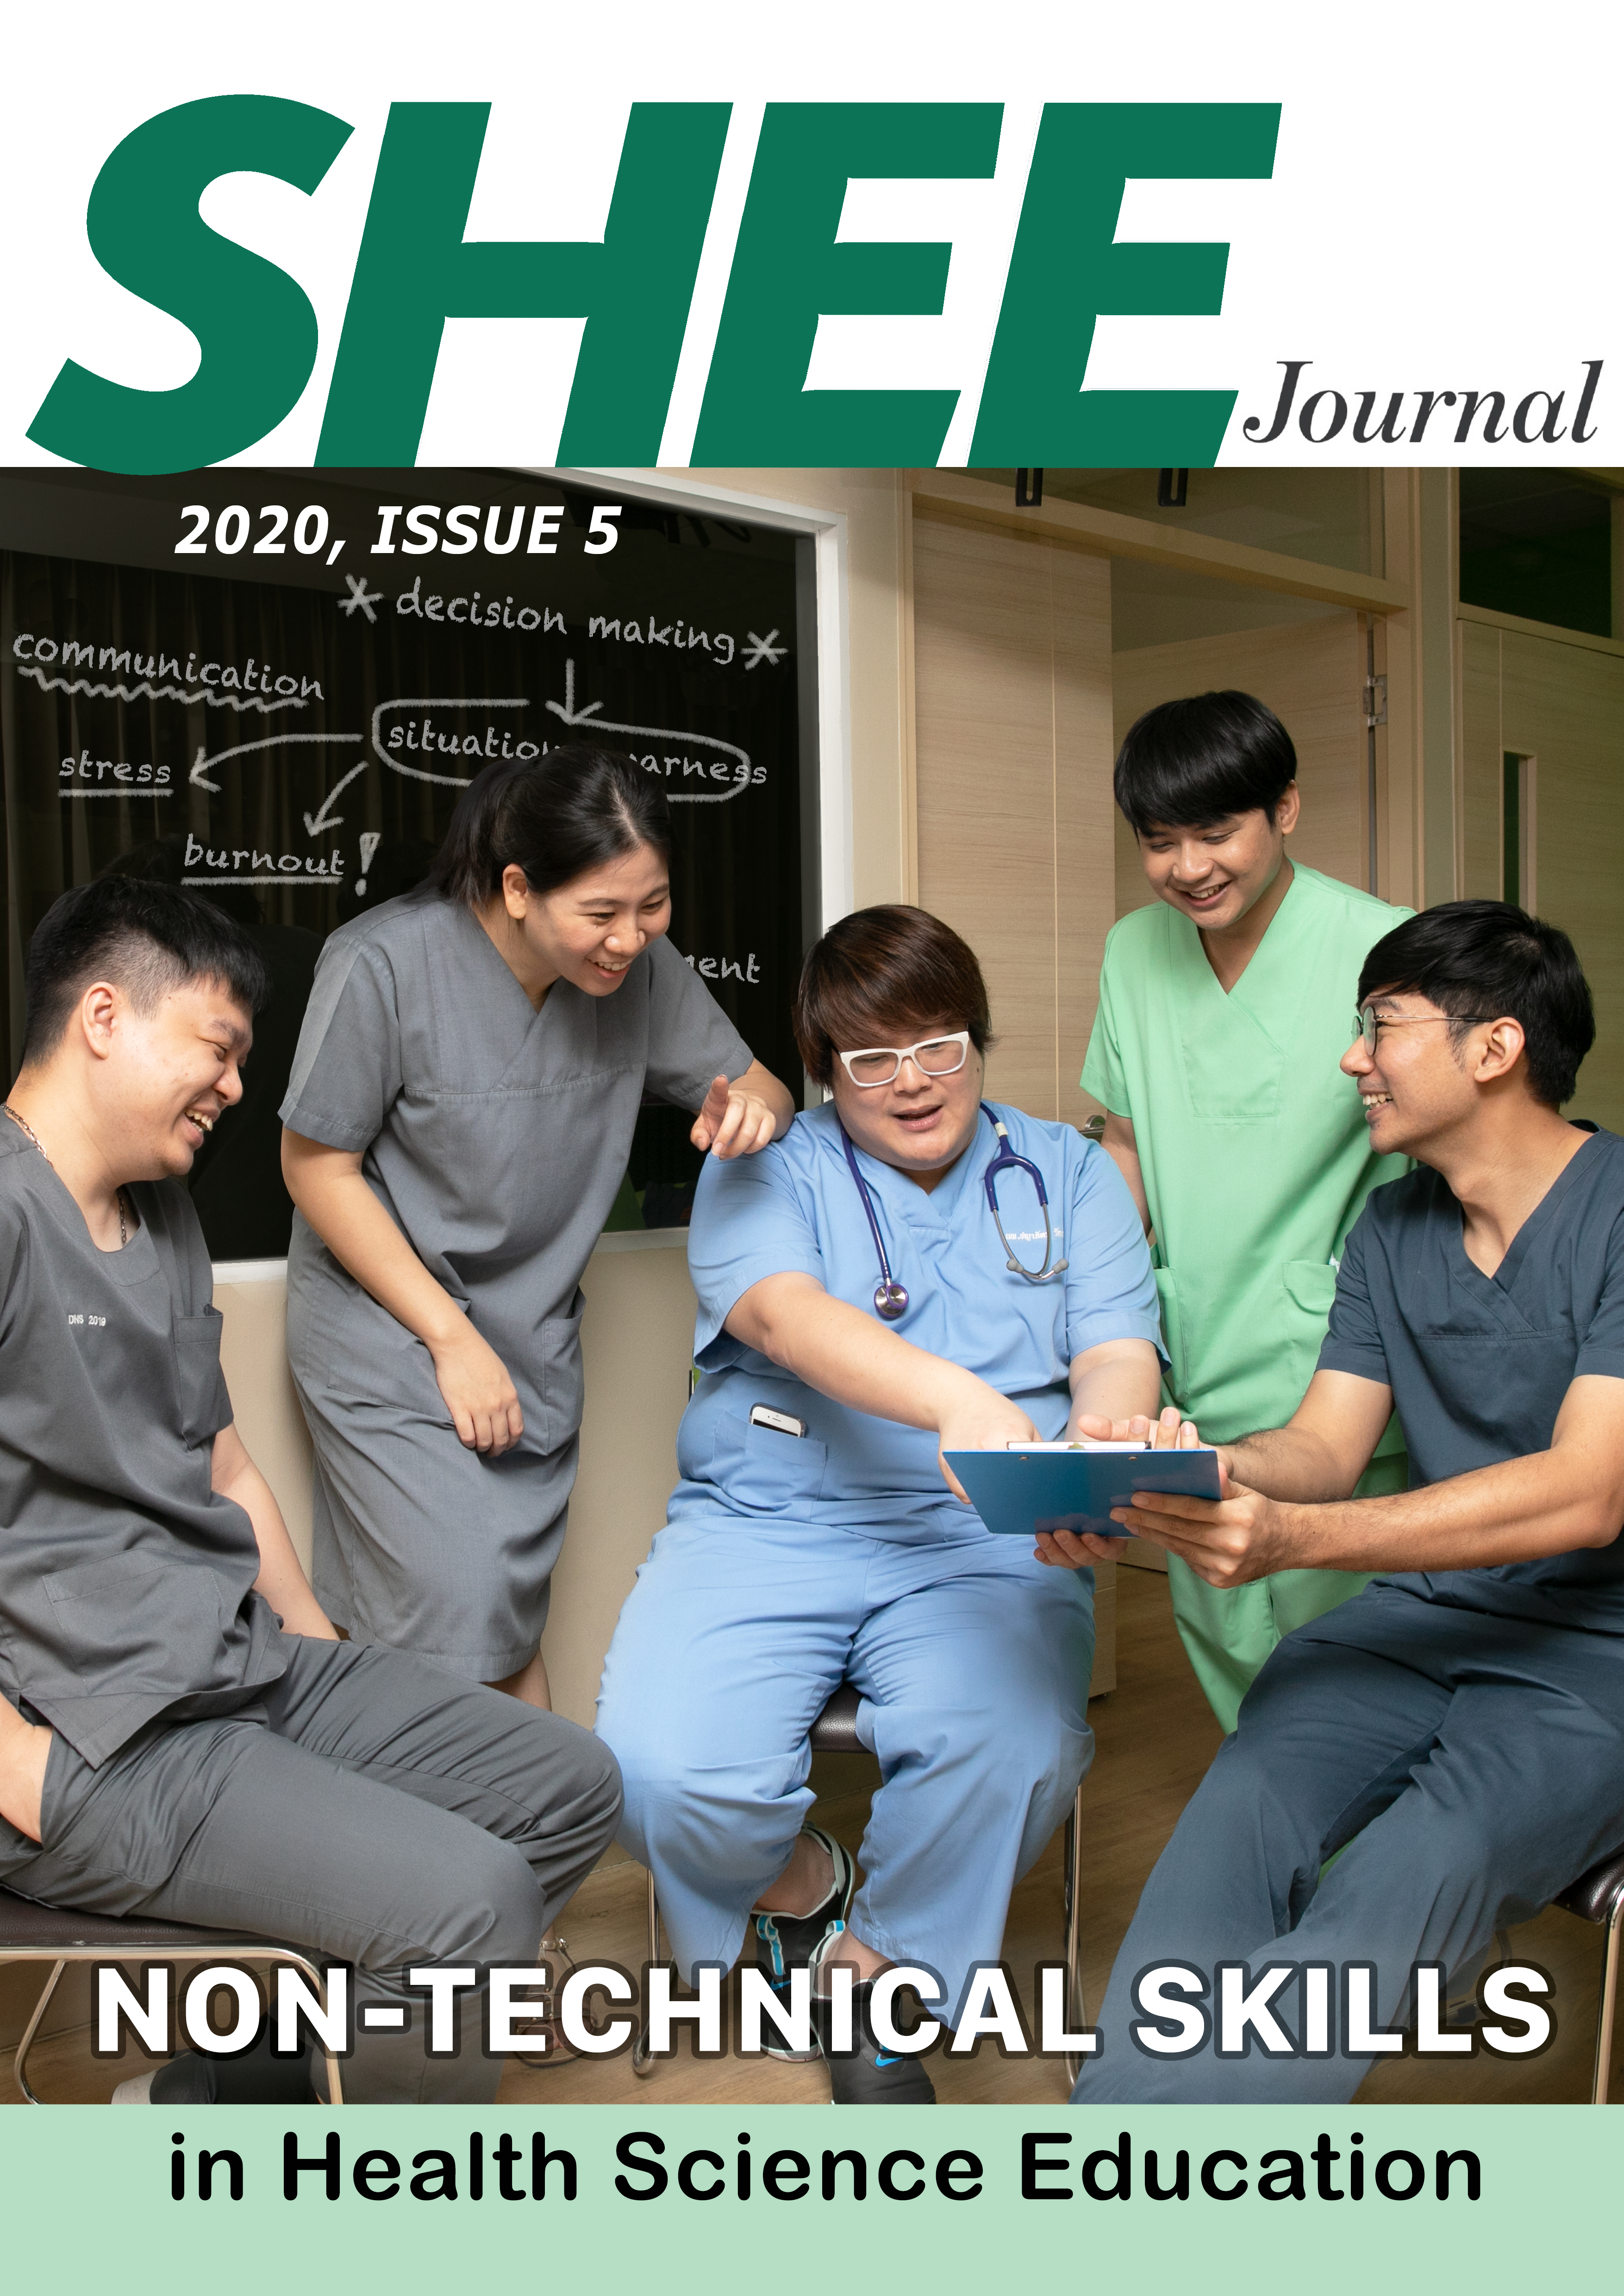 Journal Issue 5, 2020 เรื่อง Non-technical skills in health science education